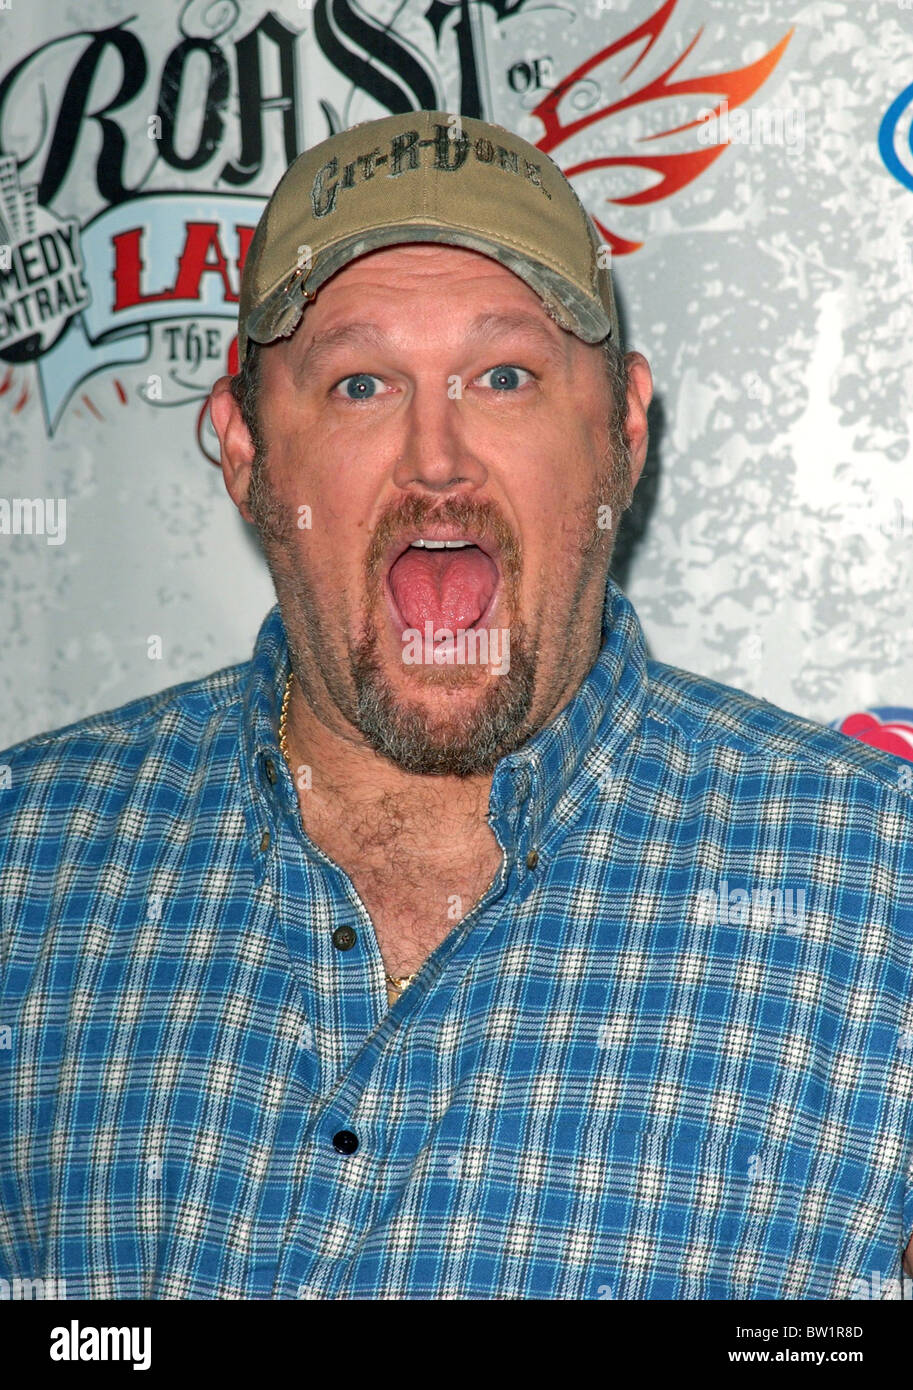 The COMEDY CENTRAL Roast of Larry The Cable Guy Stock Photo - Alamy